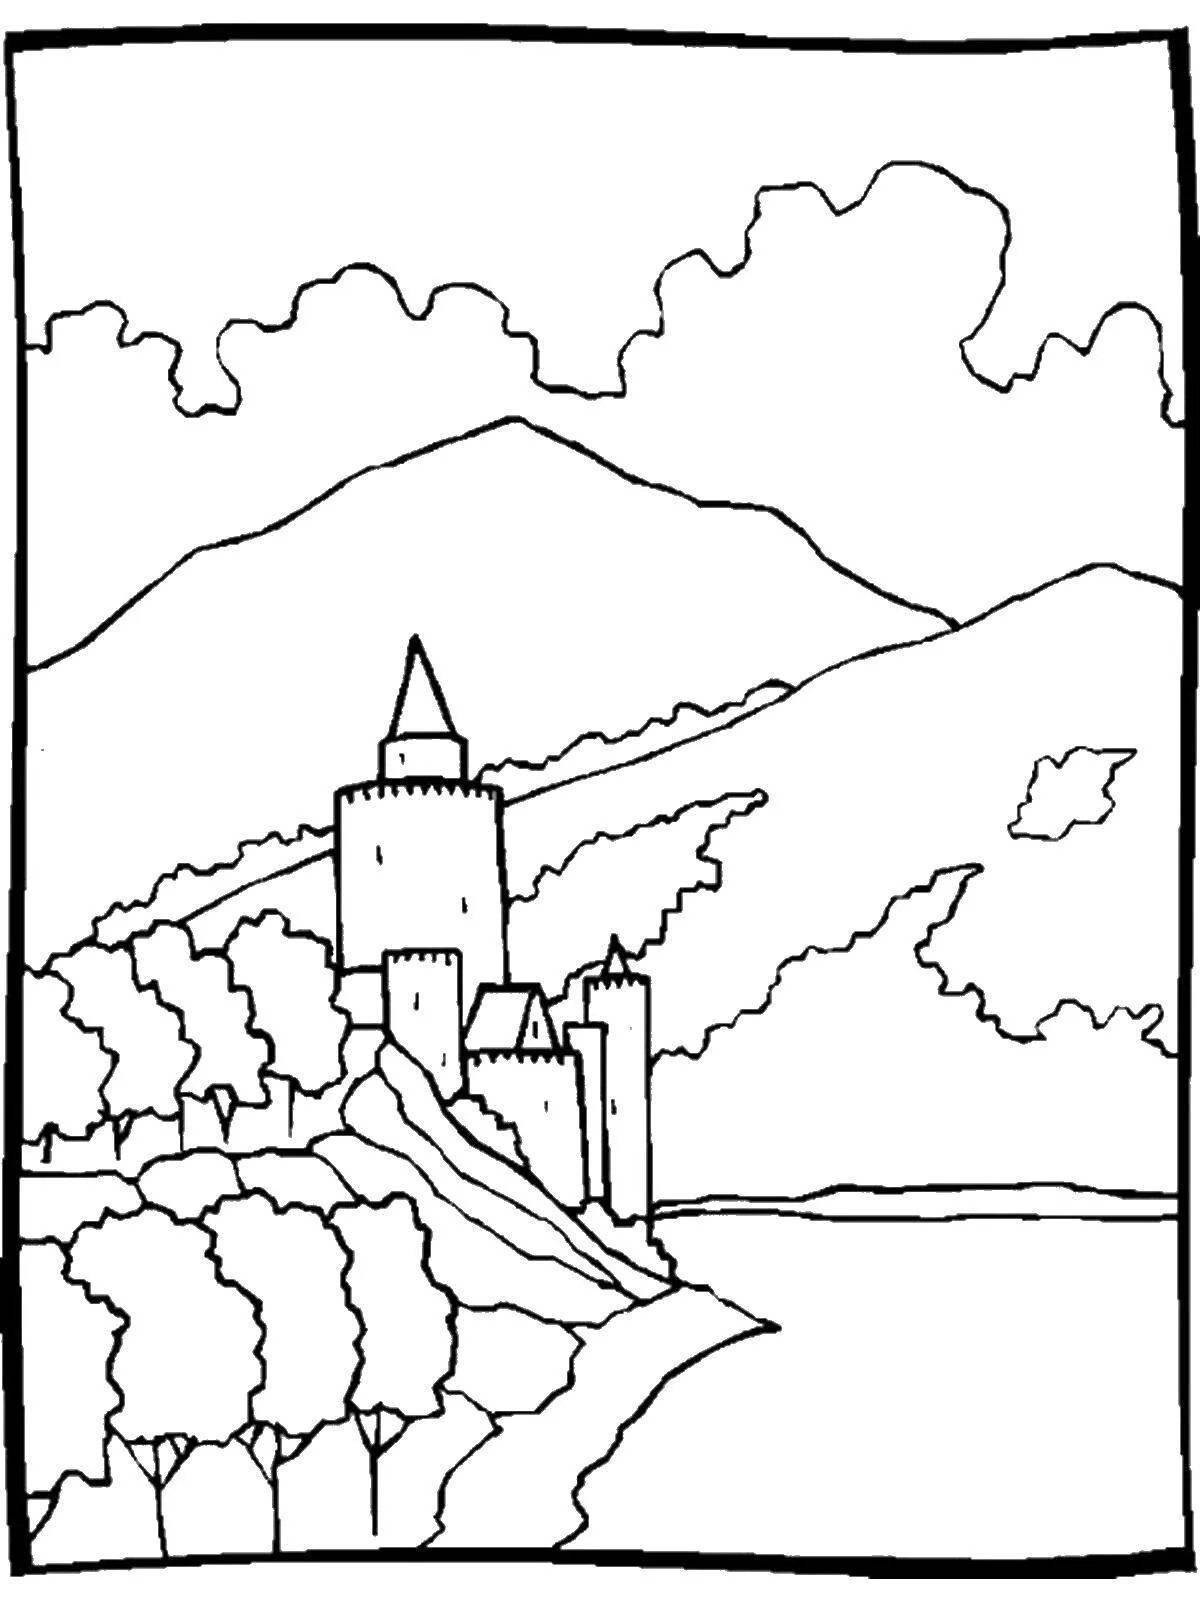 Joyful crimea coloring for younger students